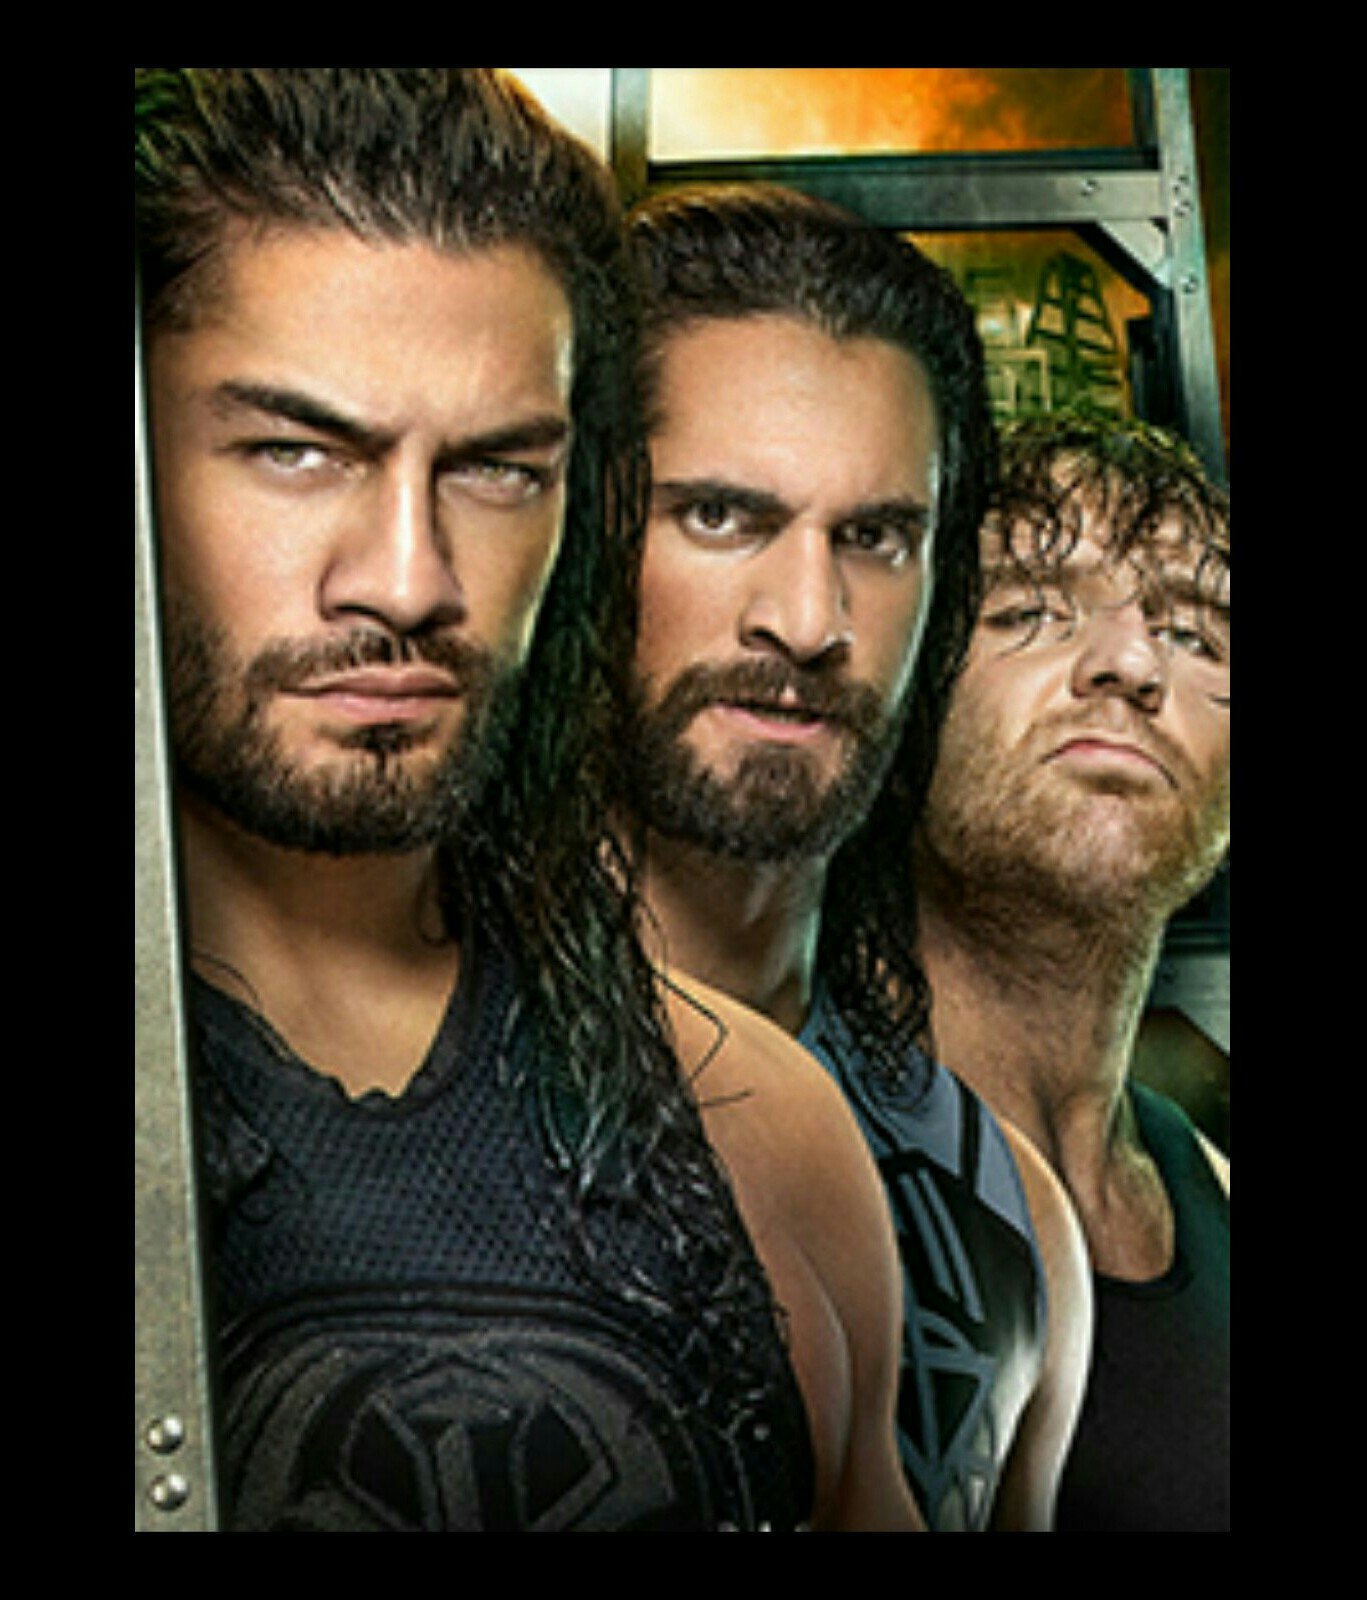 I love WWE, I love @WWERomanReigns❤, i love @TheDeanAmbrose❤ and i love @WWERollins❤, they are perfect!♥. #BelieveThat